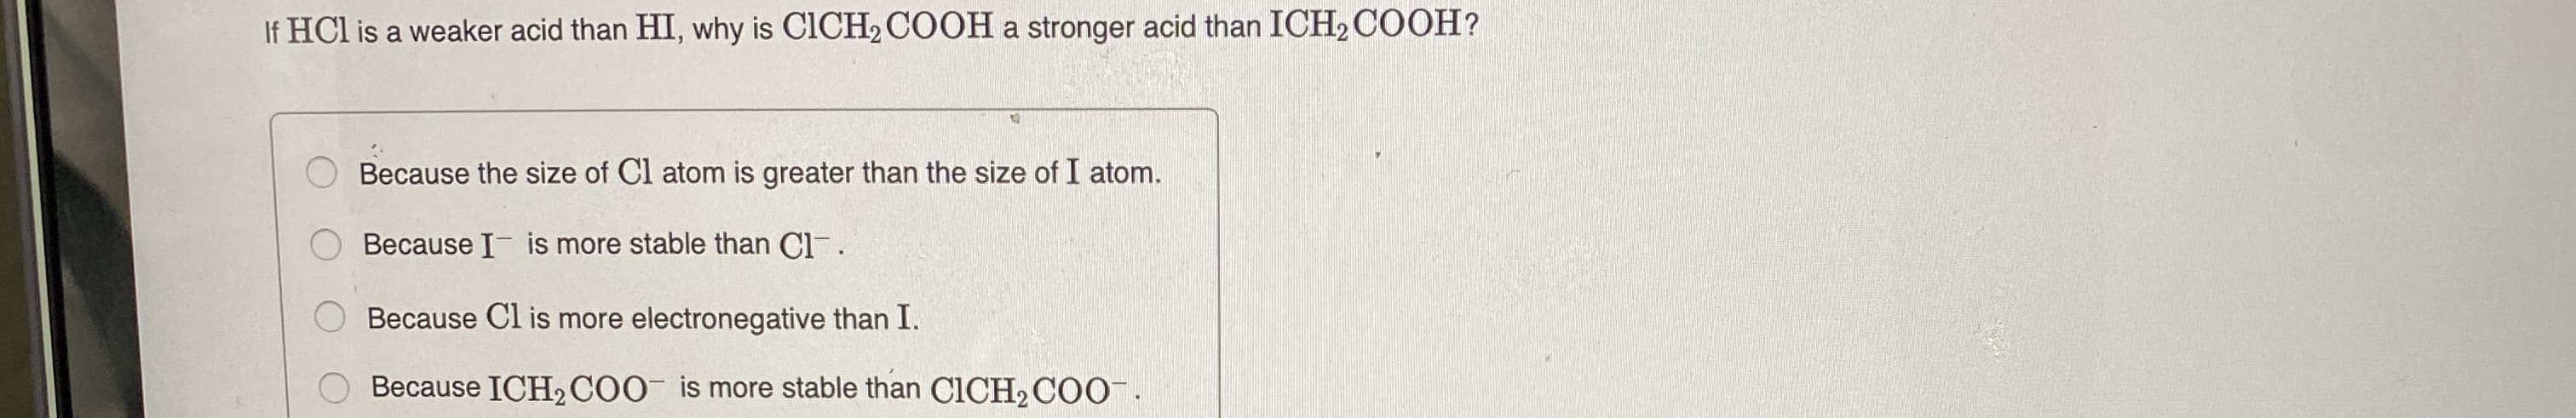 Because the size of Cl atom is greater than the size of I atom.
Because I- is more stable than Cl-.
Because Cl is more electronegative than I.
Because ICH2 COO is more stable than C1CH2COO¯.
